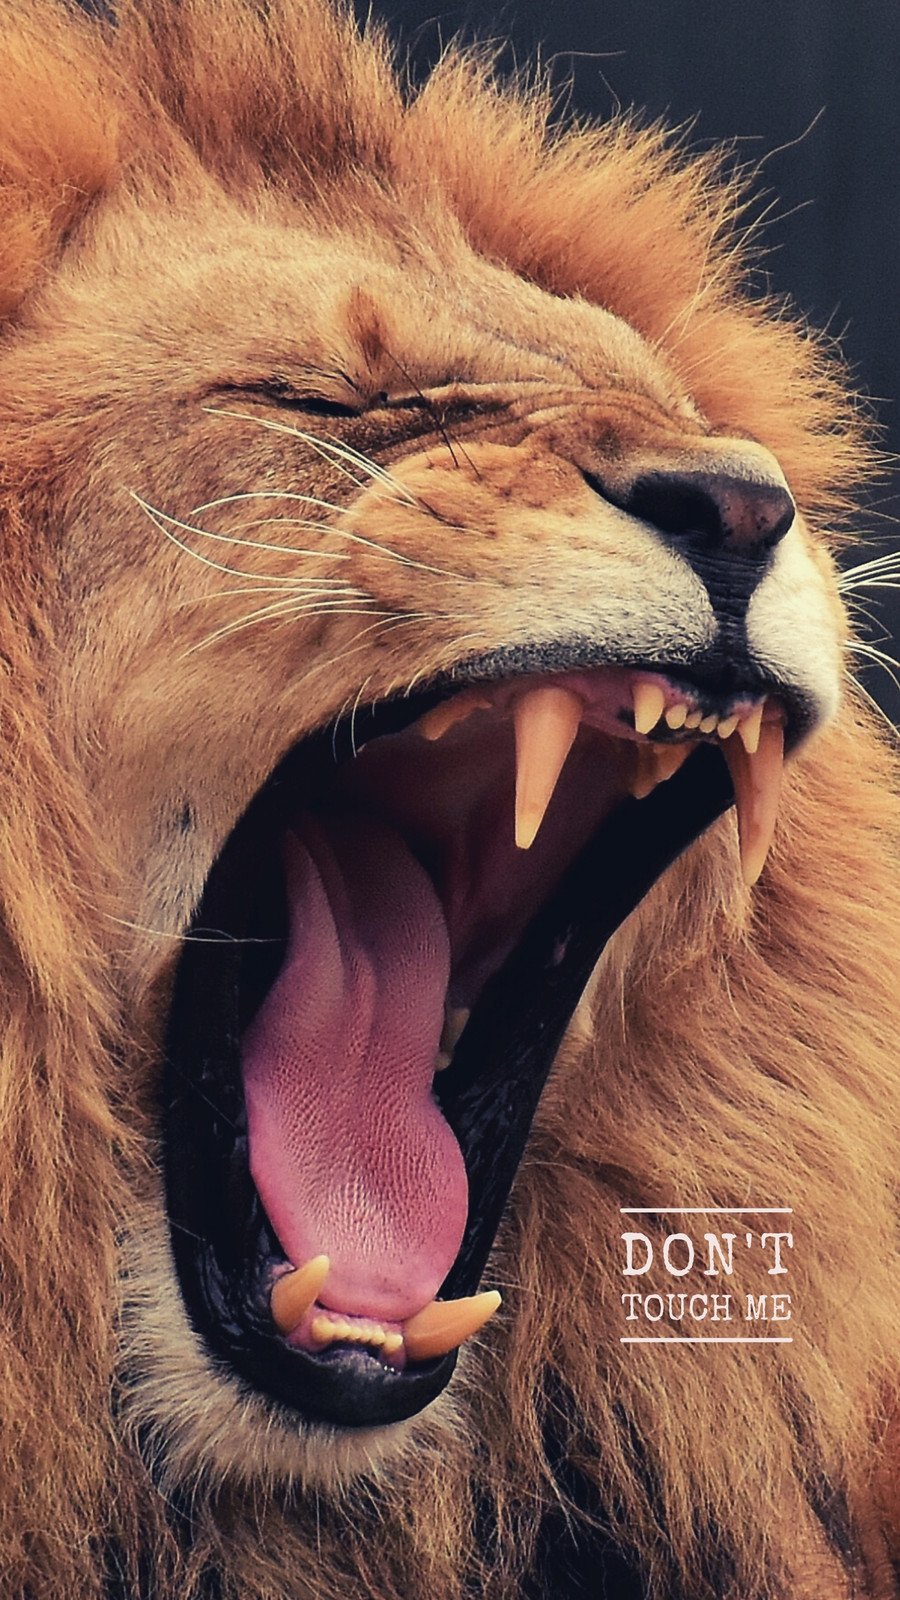 angry lion iphone wallpaper